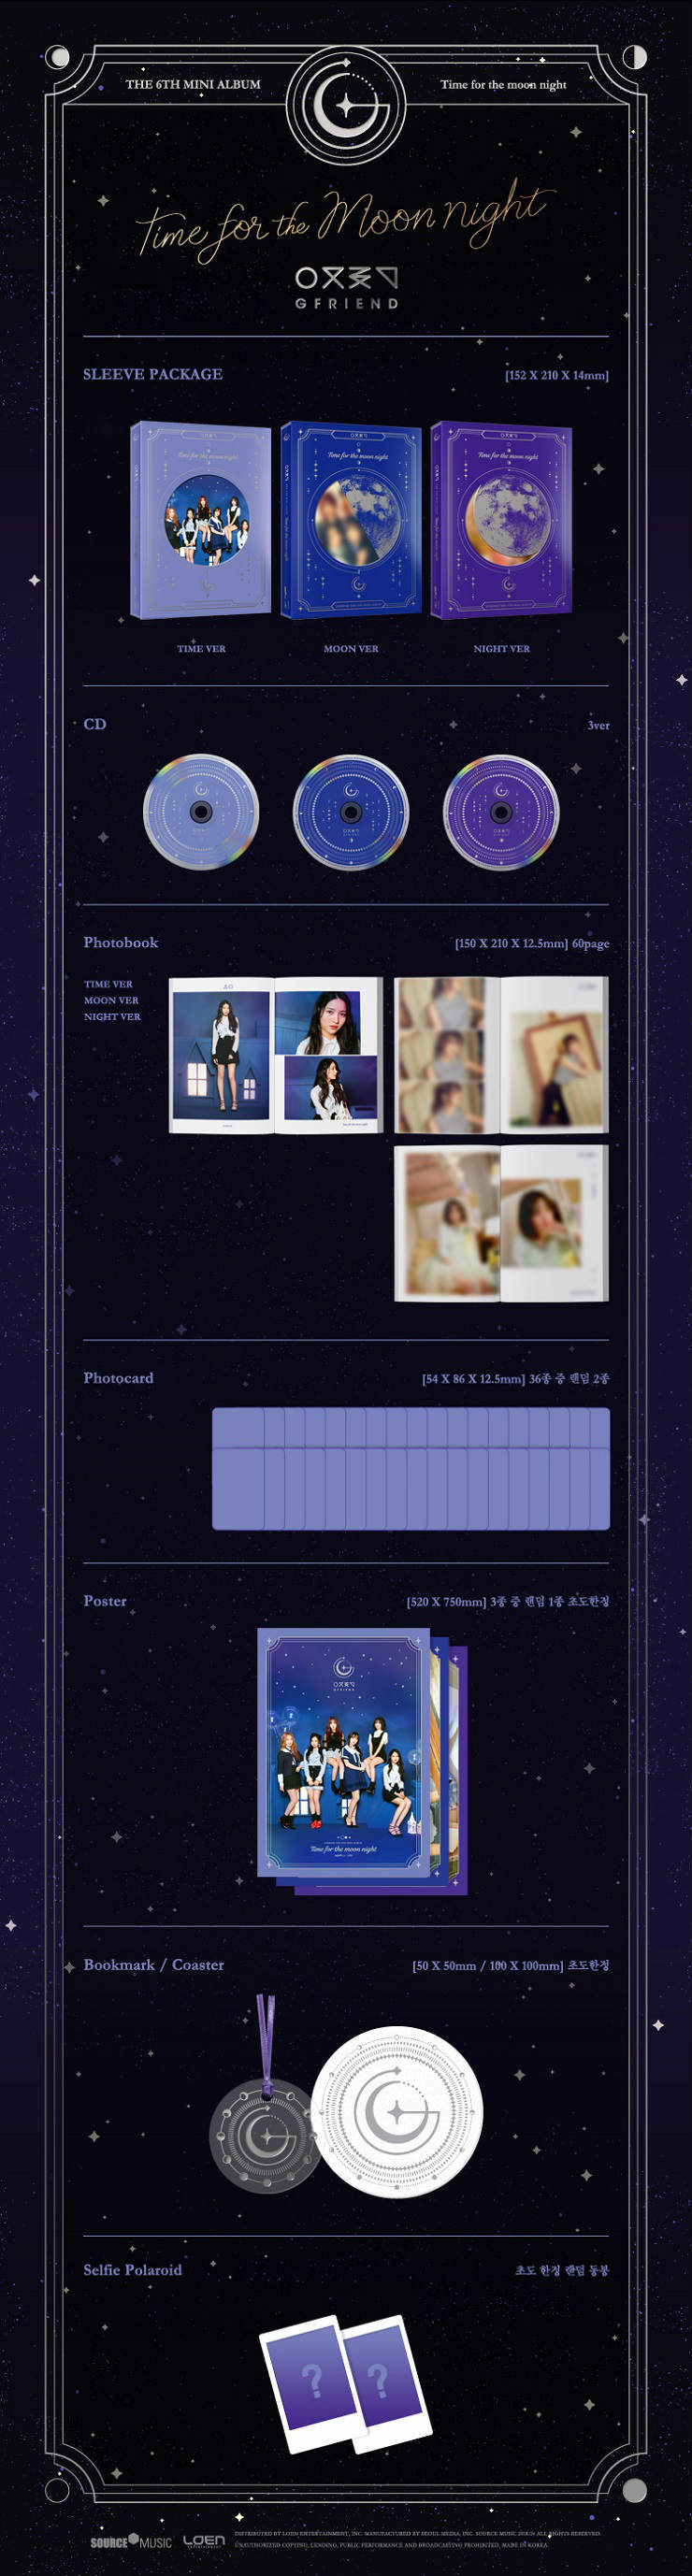 GFRIEND - TIME FOR THE MOON NIGHT []